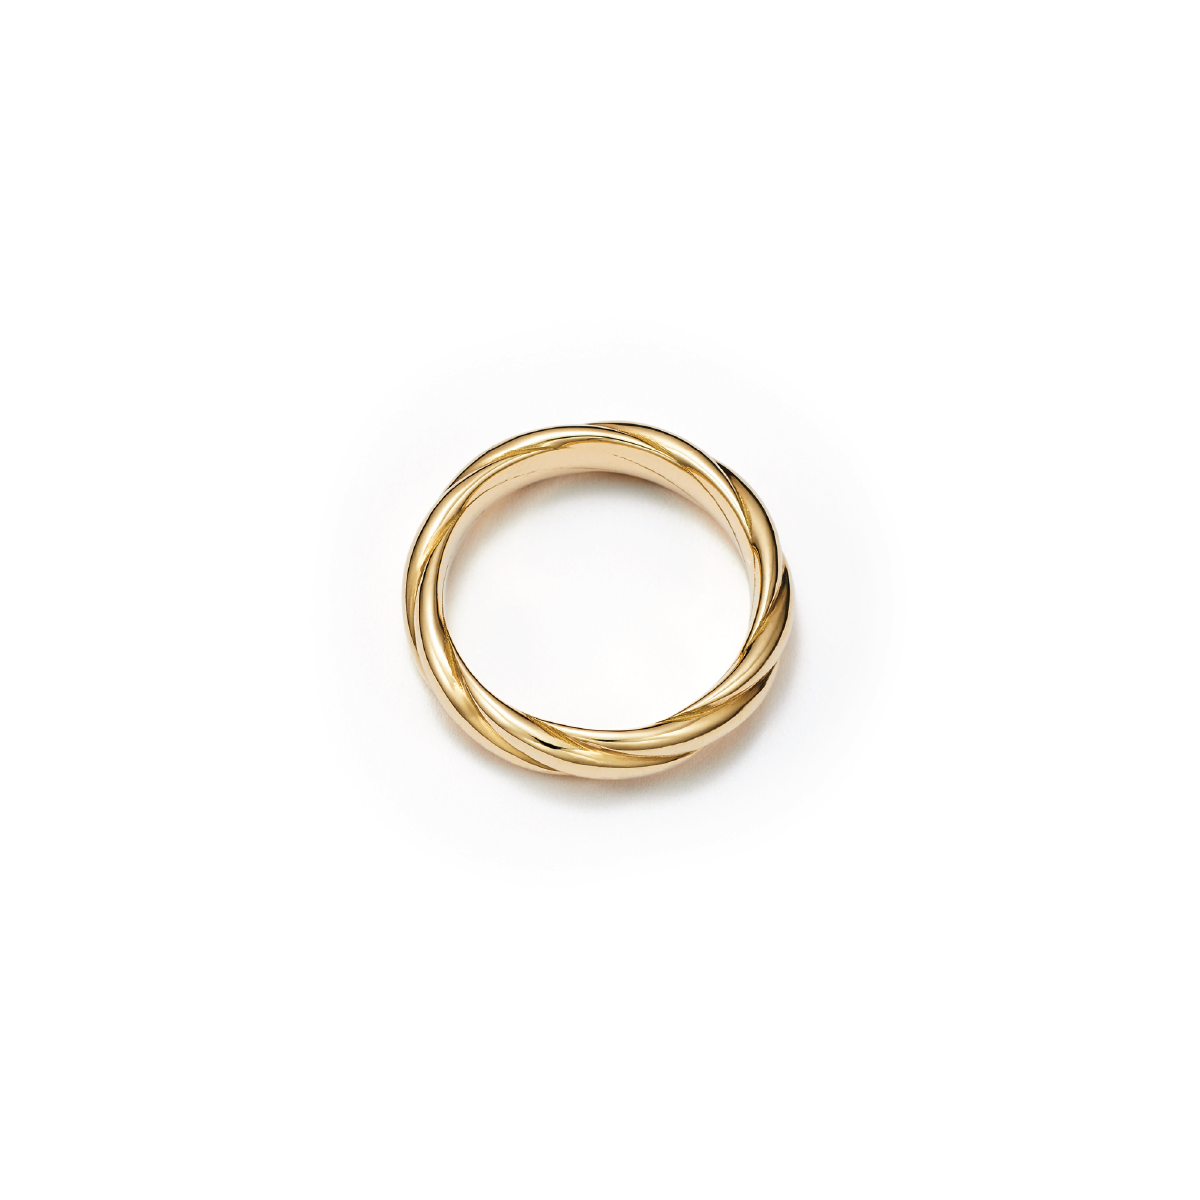 Tenderness Woven 18kt Certified Fairmined Ecological Gold Wedding Ring - Top View